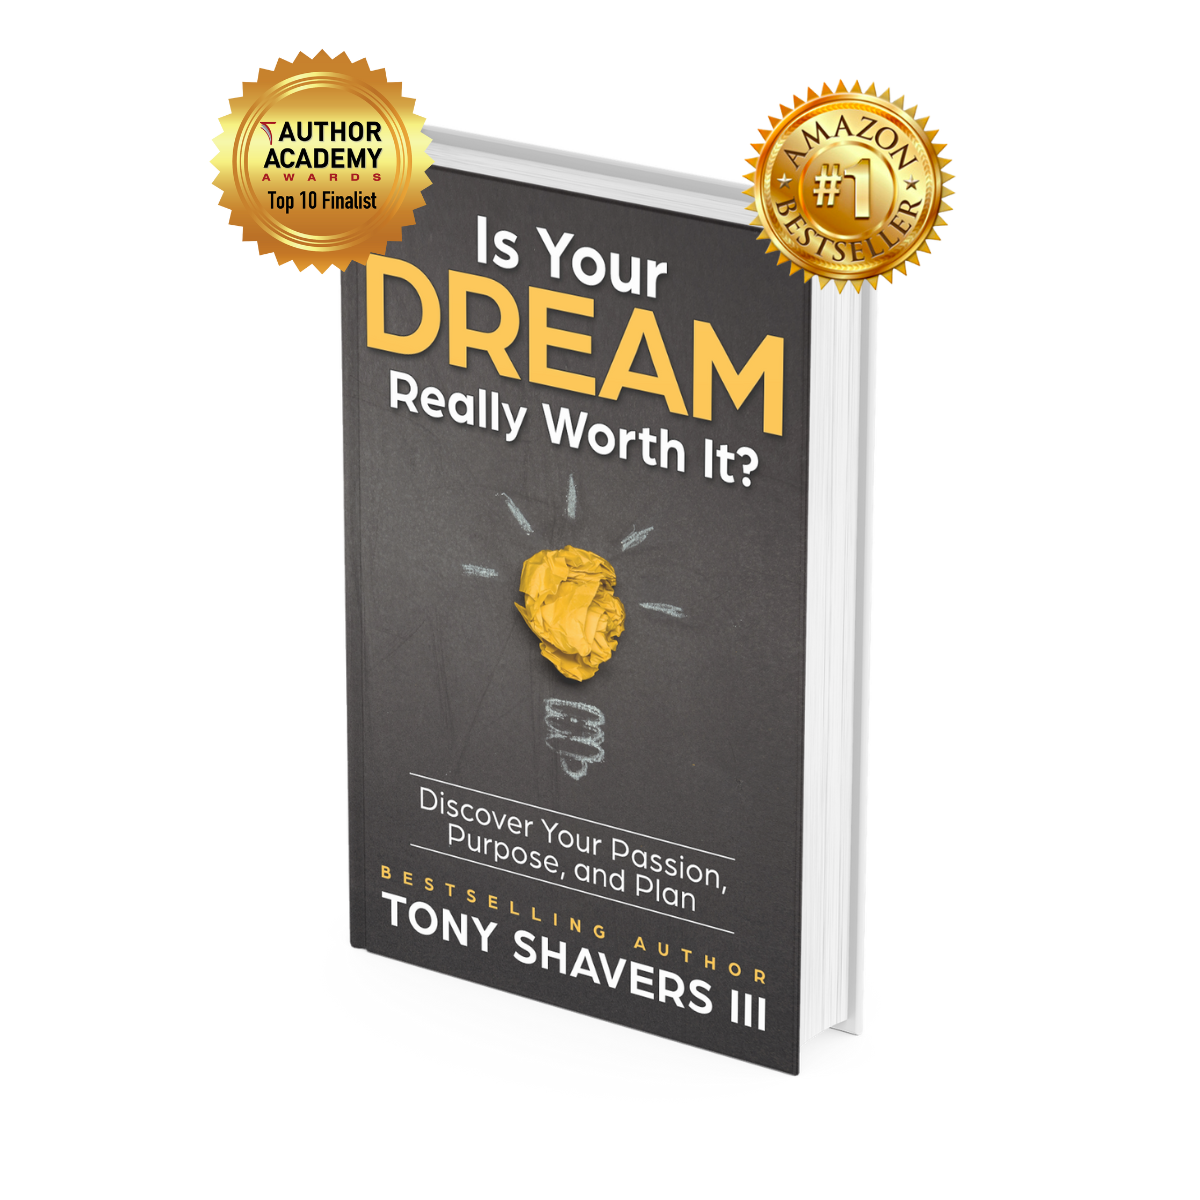 Is Your Dream Really Worth It?